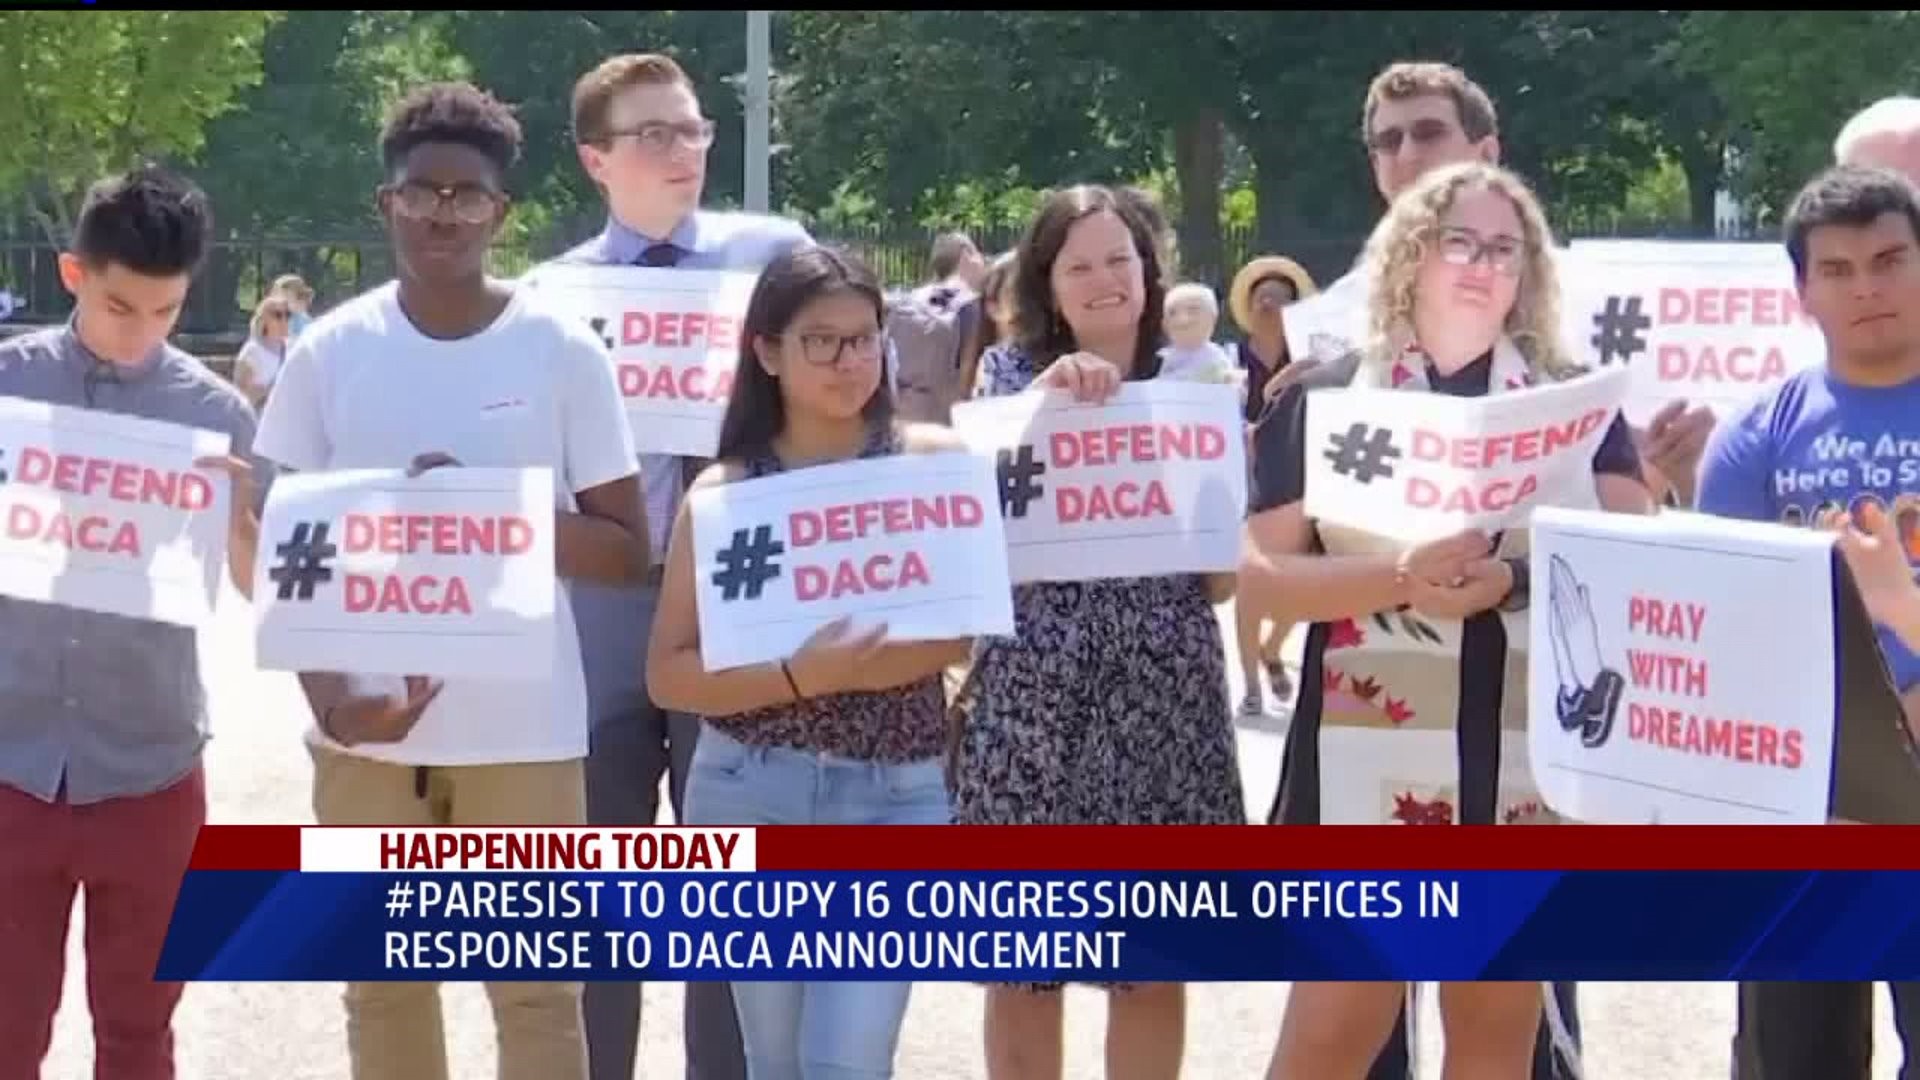 A number of demonstrations against President Trump`s DACA decision are expected to take place today, including here in PA